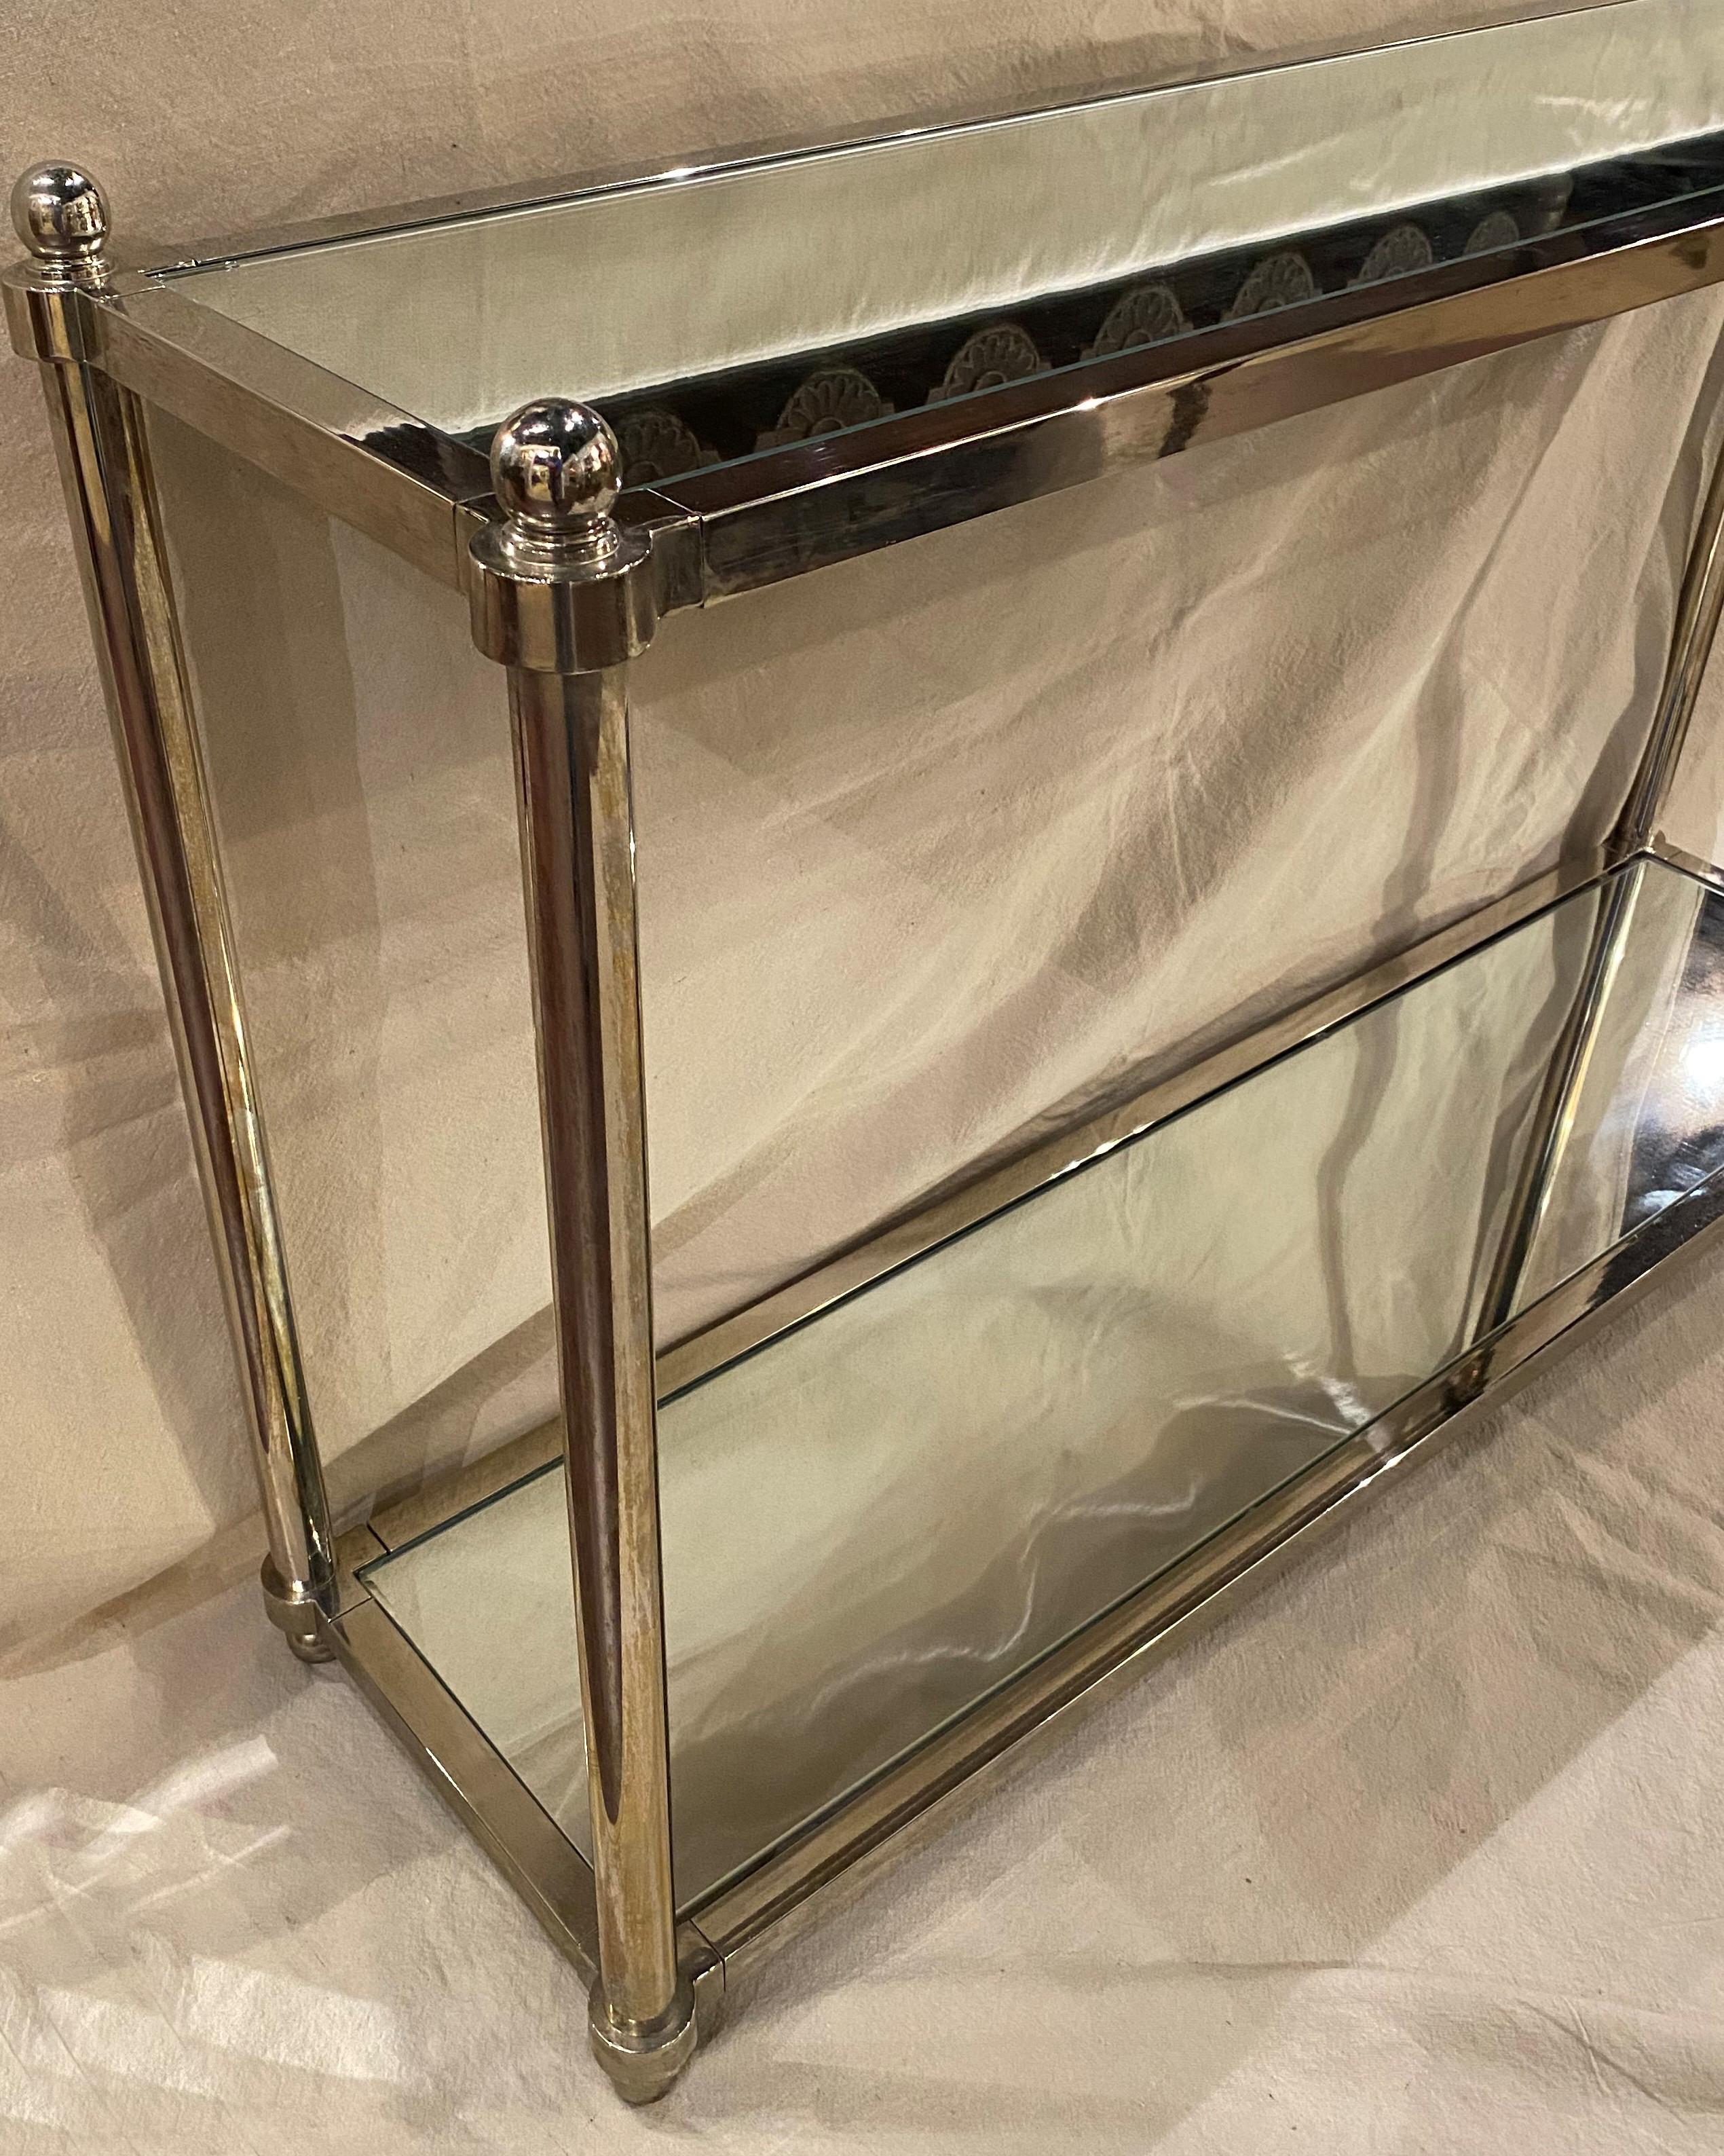 A fine Milo Baughman style two tiered chrome console or sofa table with removable mirrored glass shelves, unsigned. This table probably dates to the 1970’s and is in very good condition, with some surface imperfections, minor chrome tarnish, and